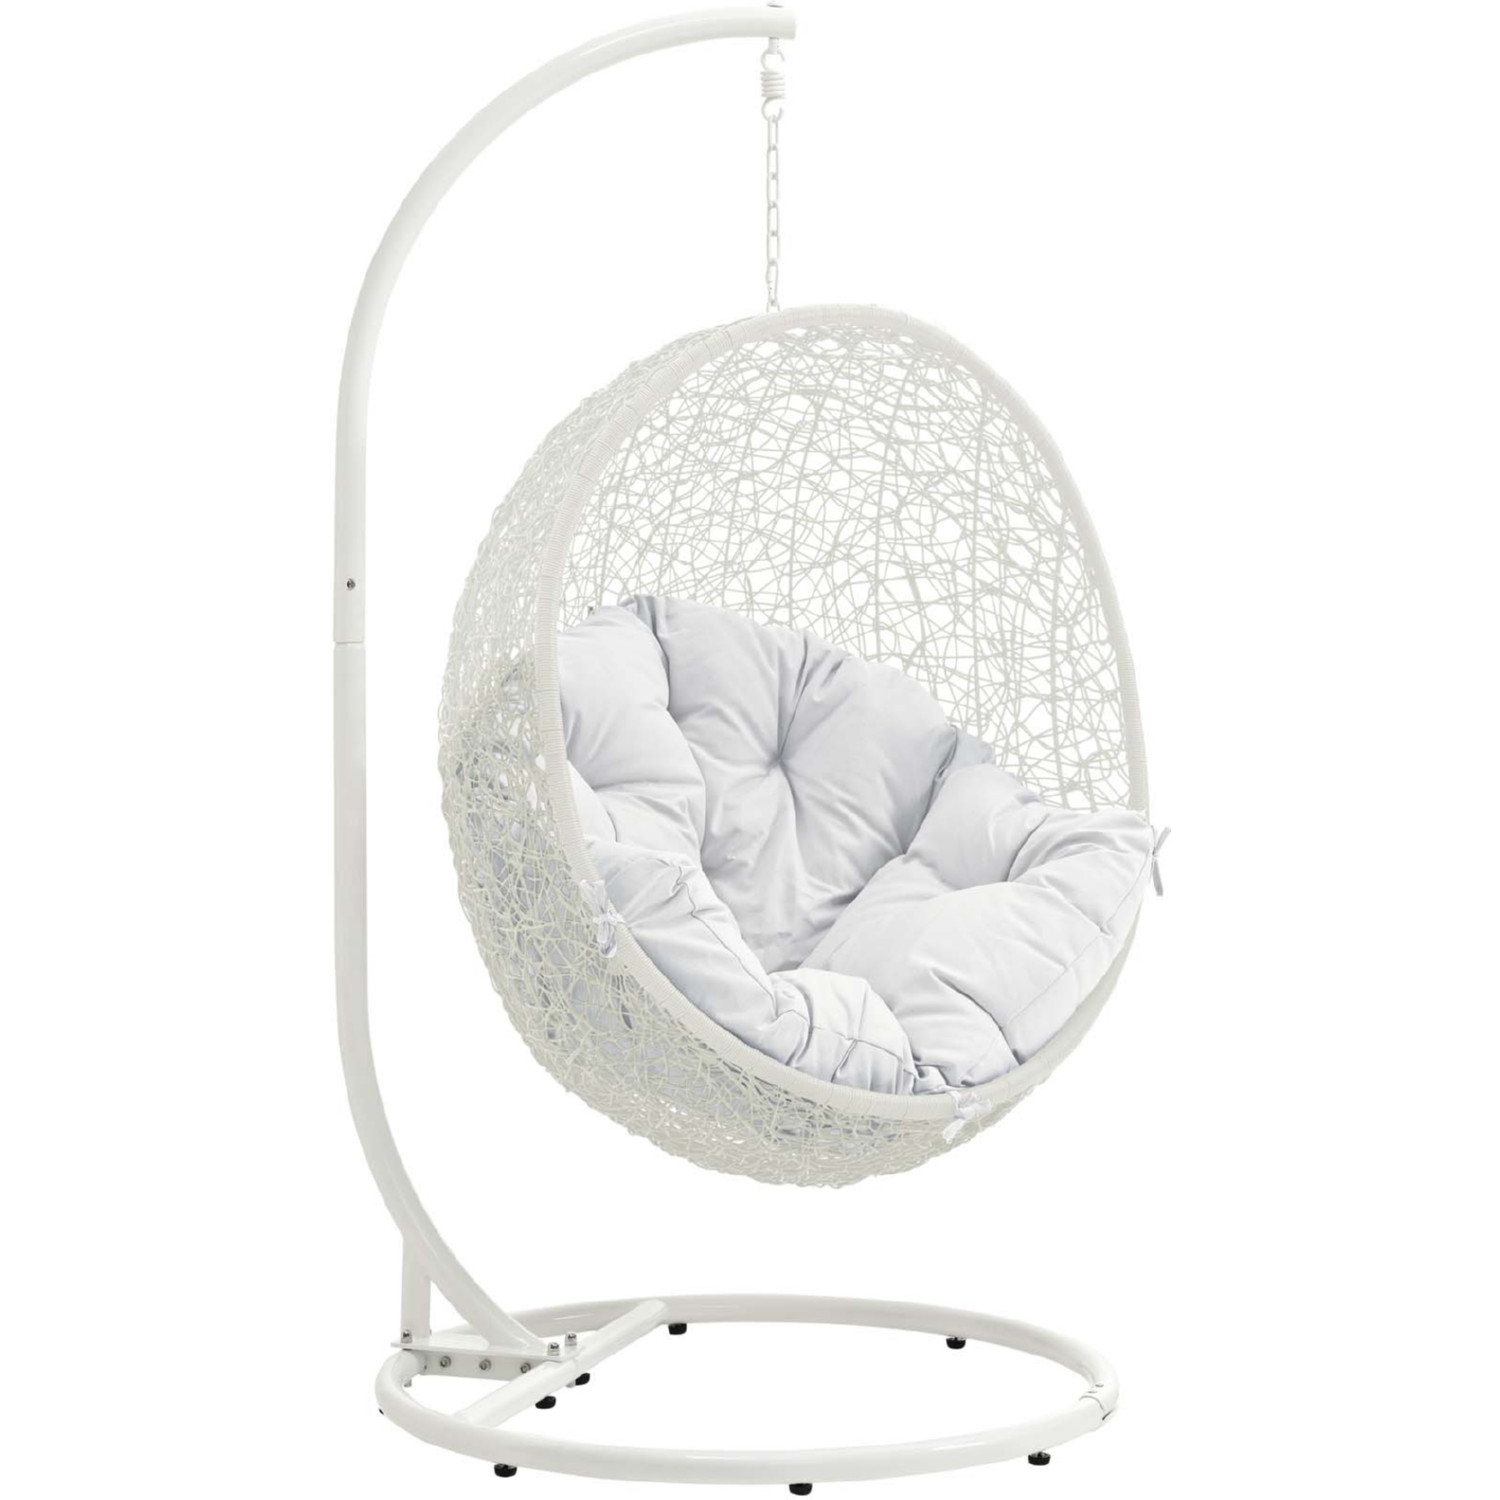 Modway Eei 2273 Whi Whi Hide Outdoor Patio Swing Chair W Stand In